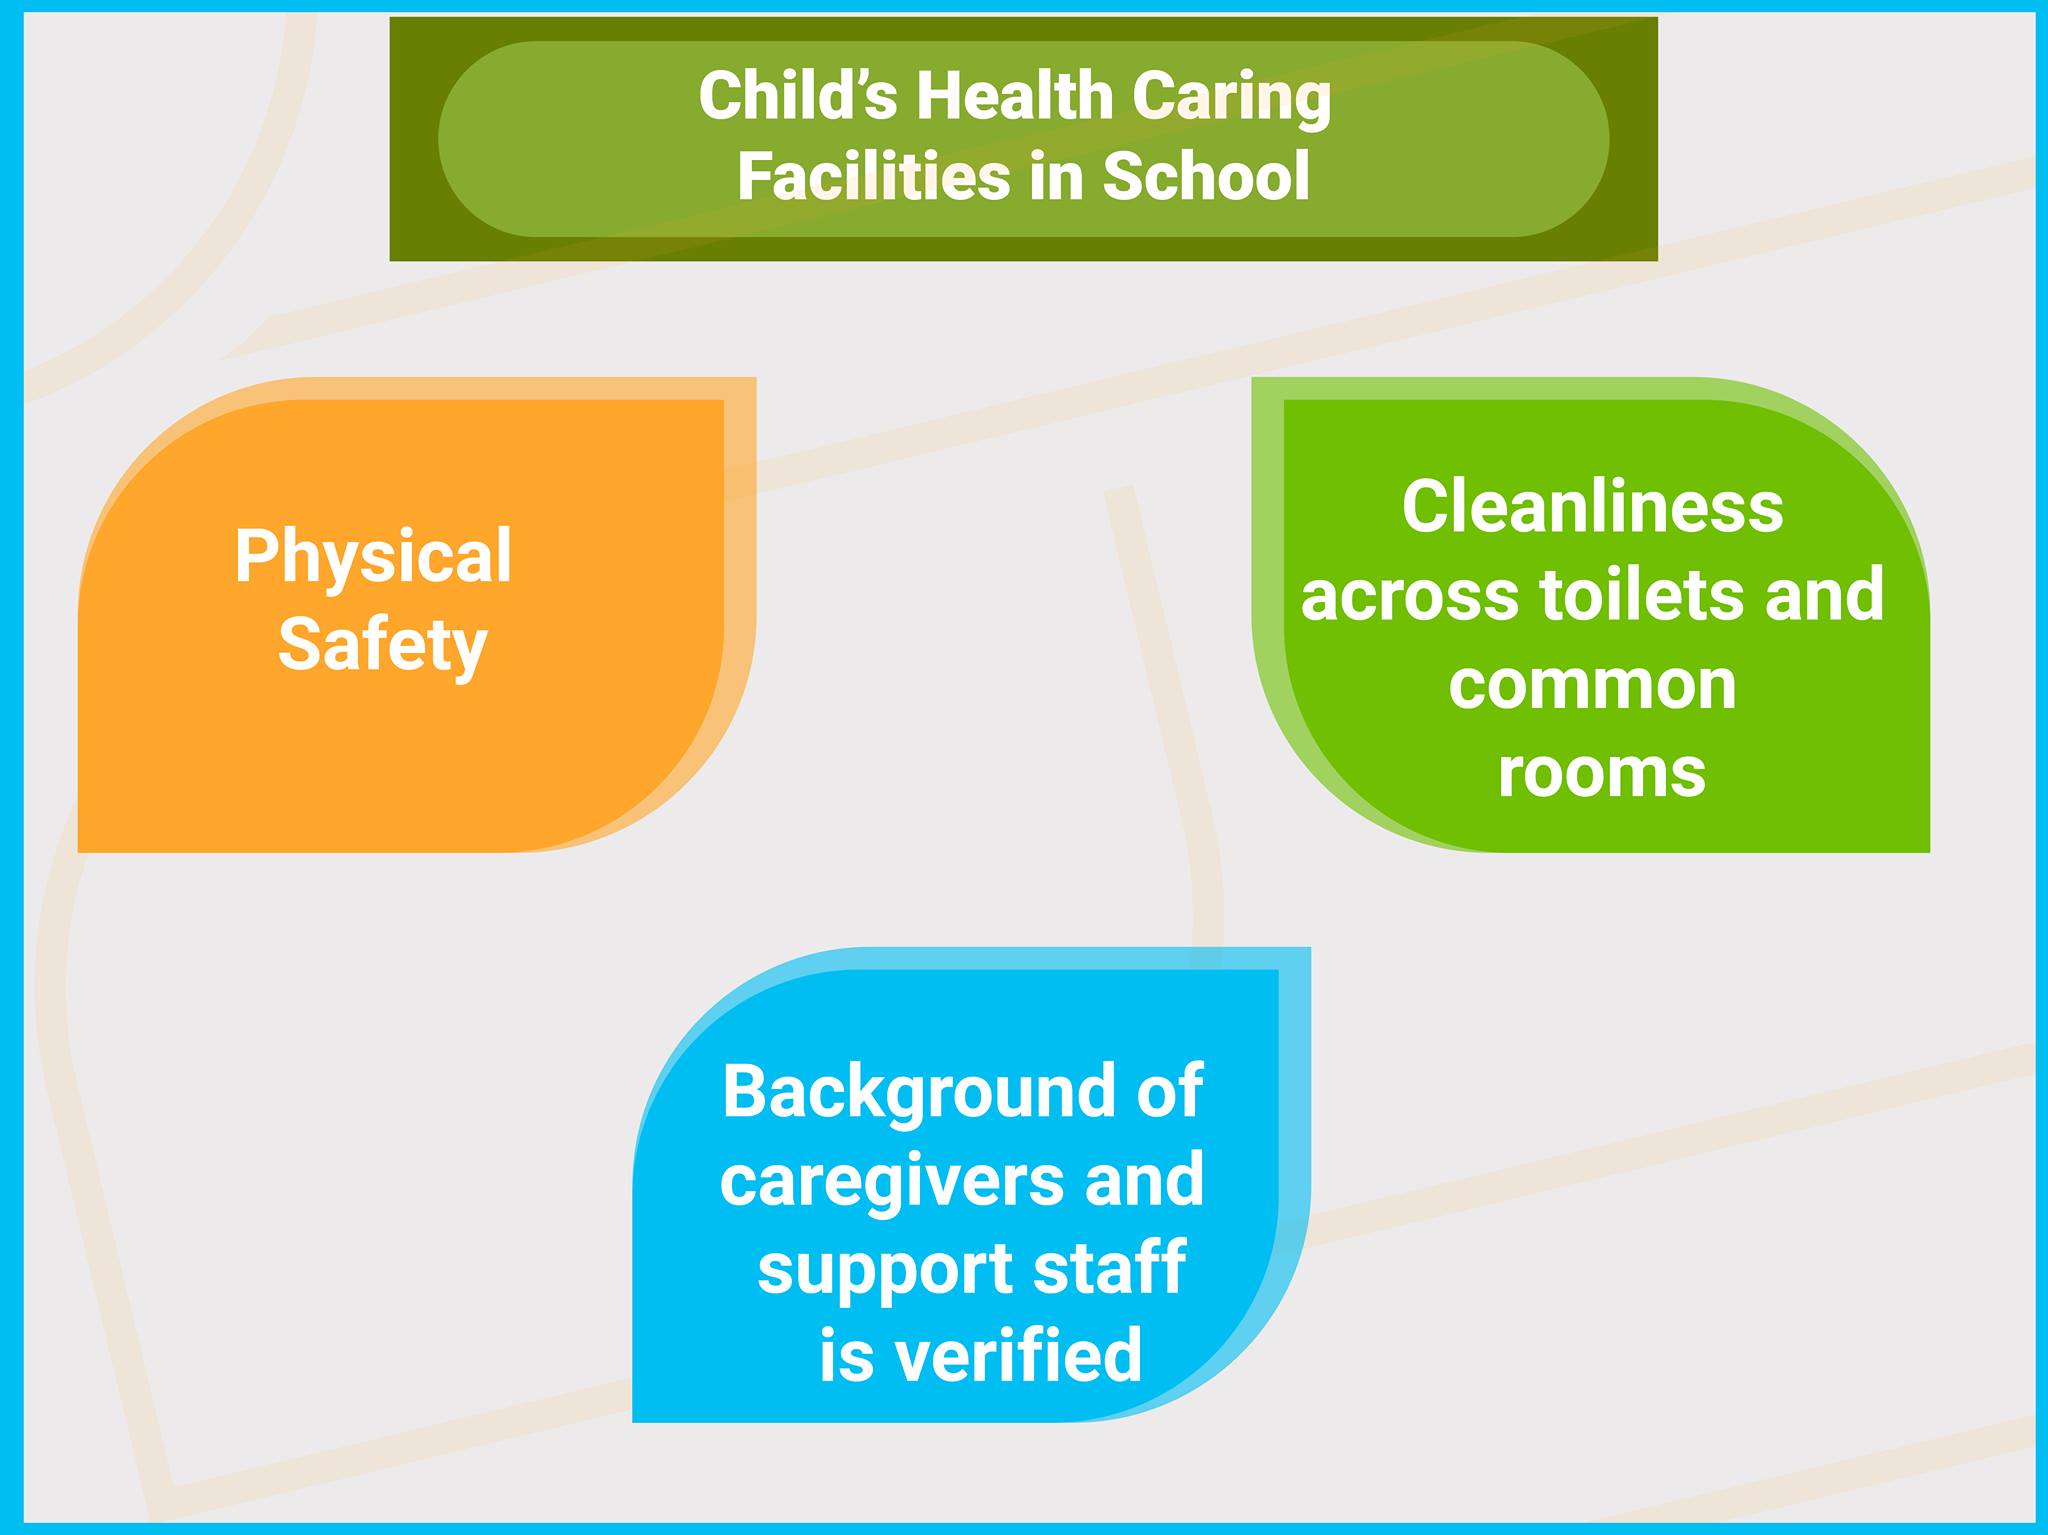 Child’s Health Caring Facilities in School